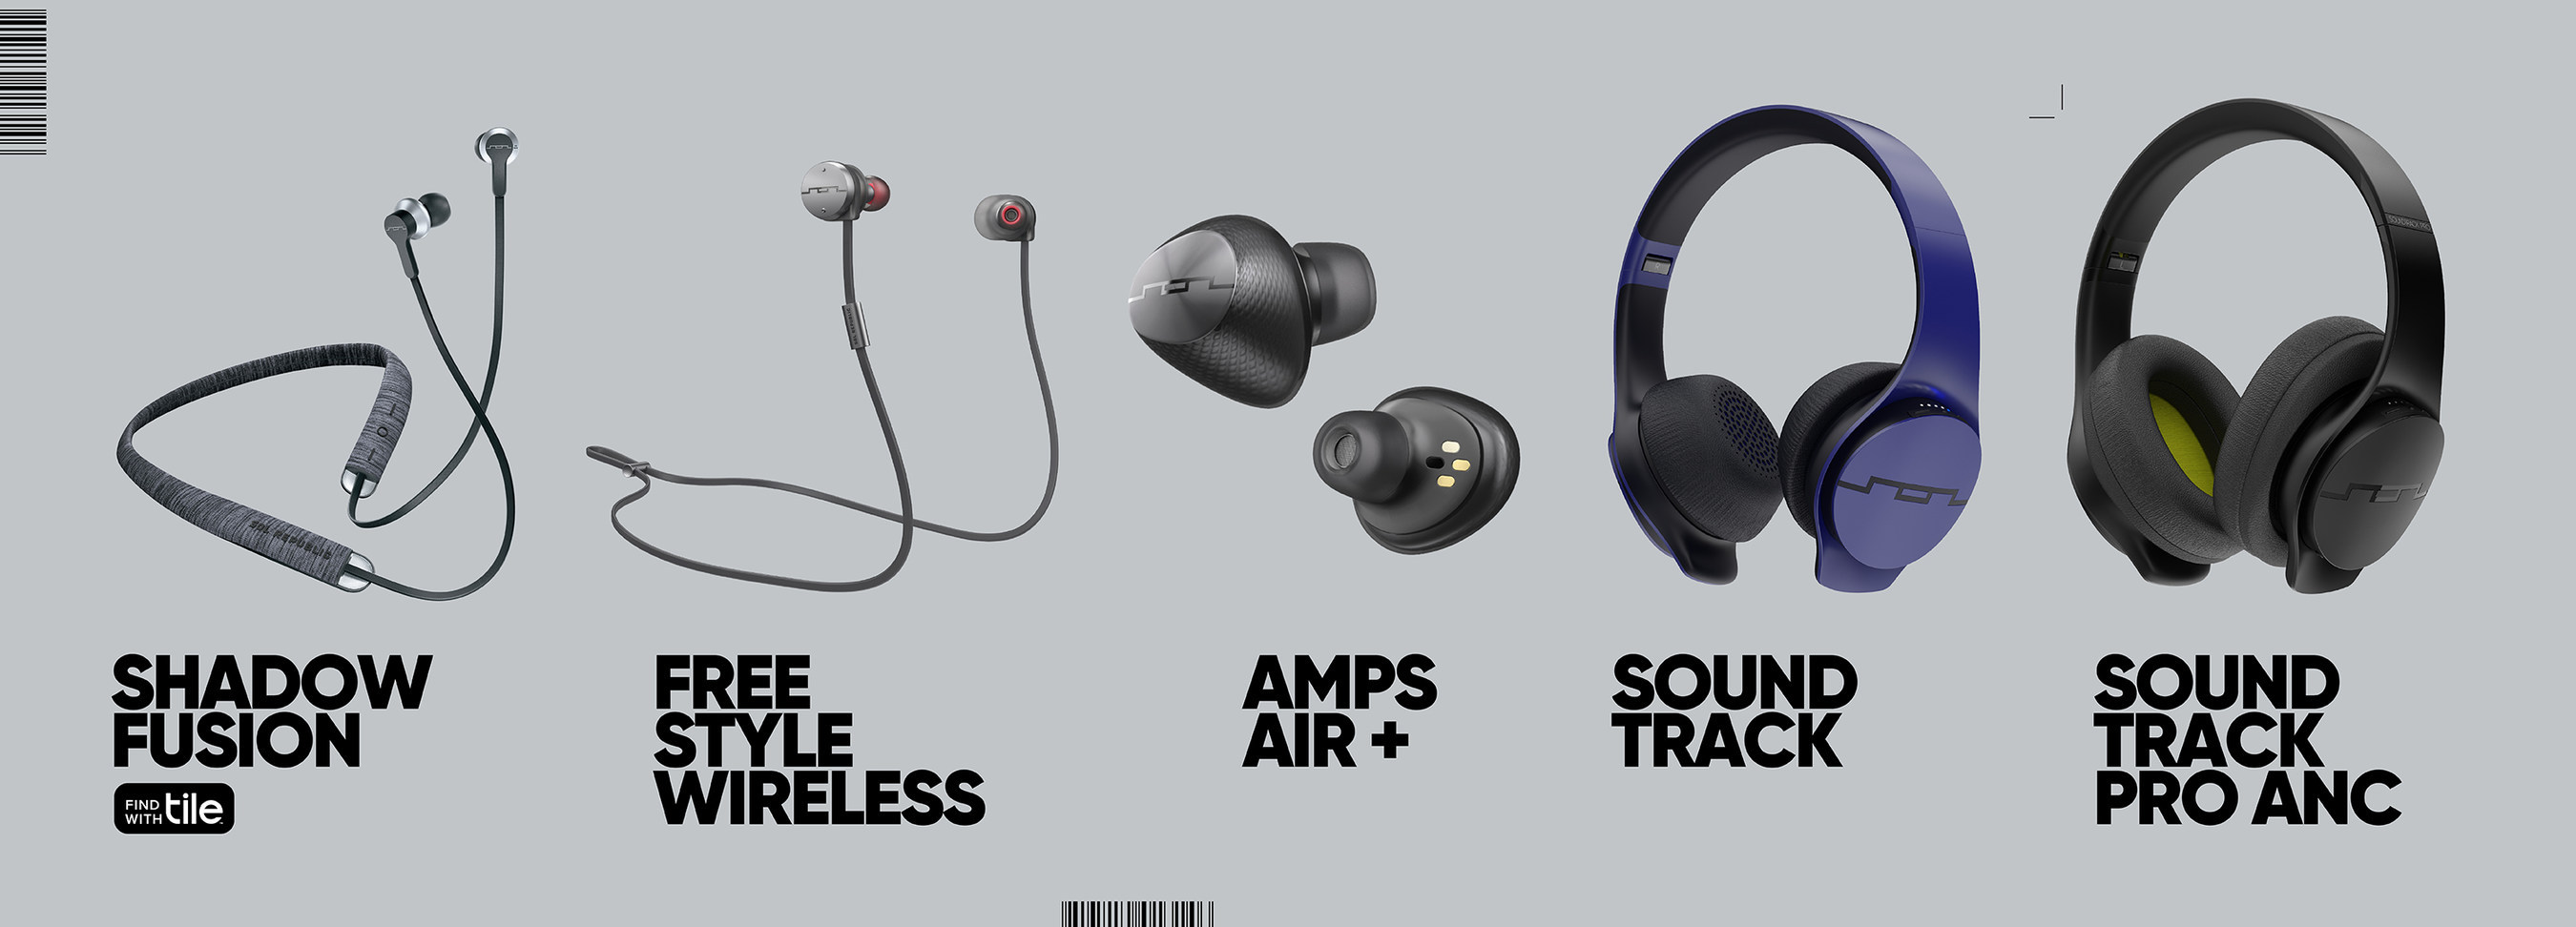 SOL REPUBLIC Debuts Anticipated Headphone Releases Including Shadow Fusion With Tile Integration At CES 2019